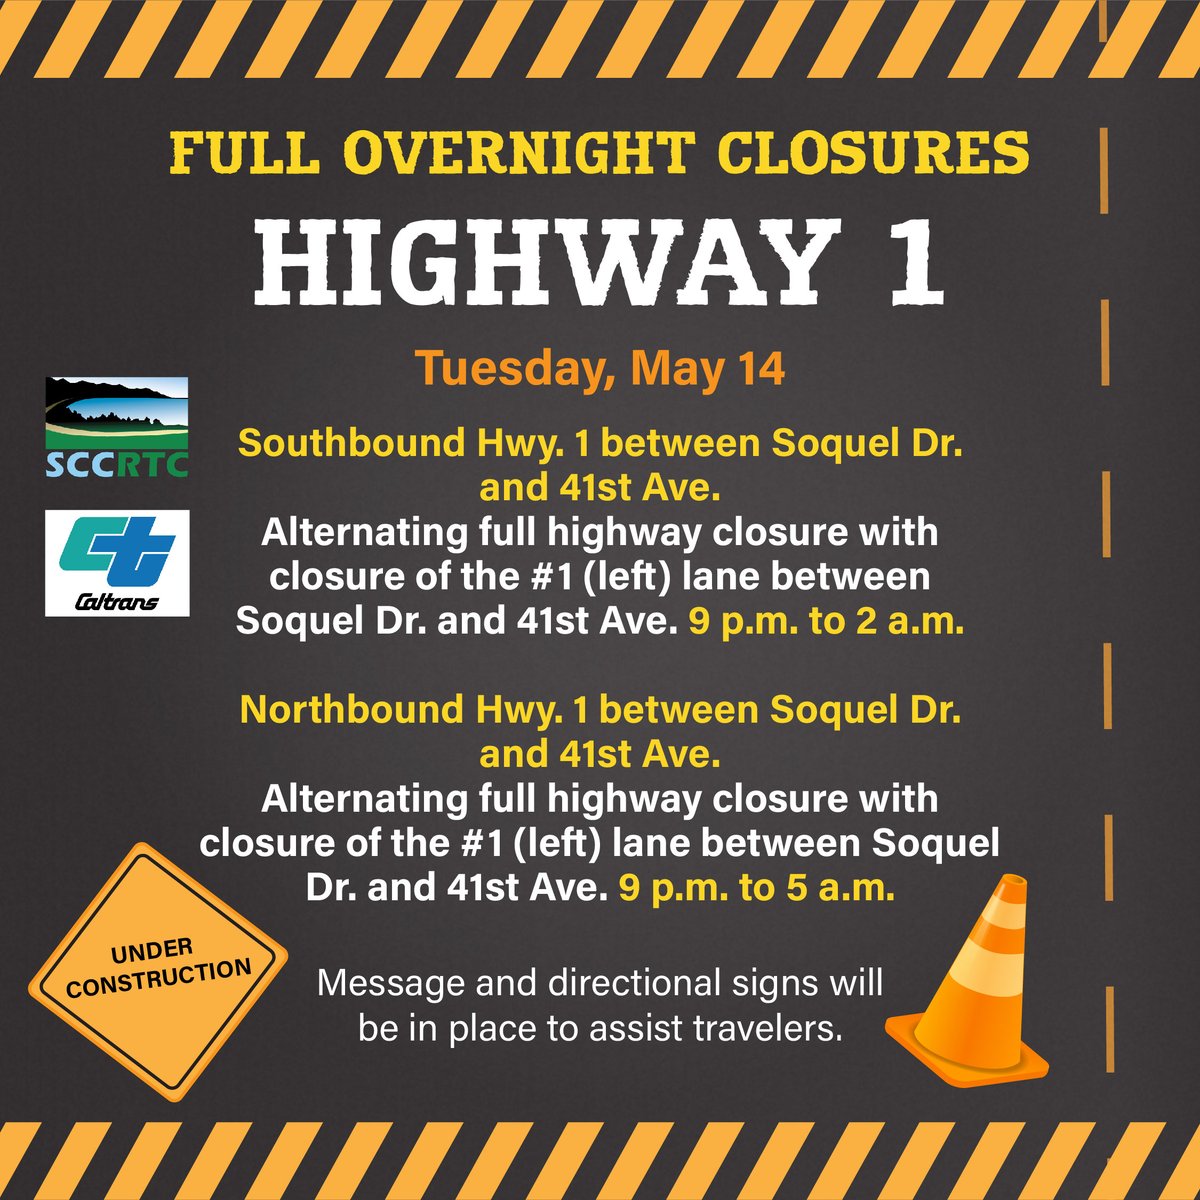 Attention drivers! There will be alternating full overnight closures of Hwy 1 happening on Tuesday, May 14. Please plan your travels accordingly.